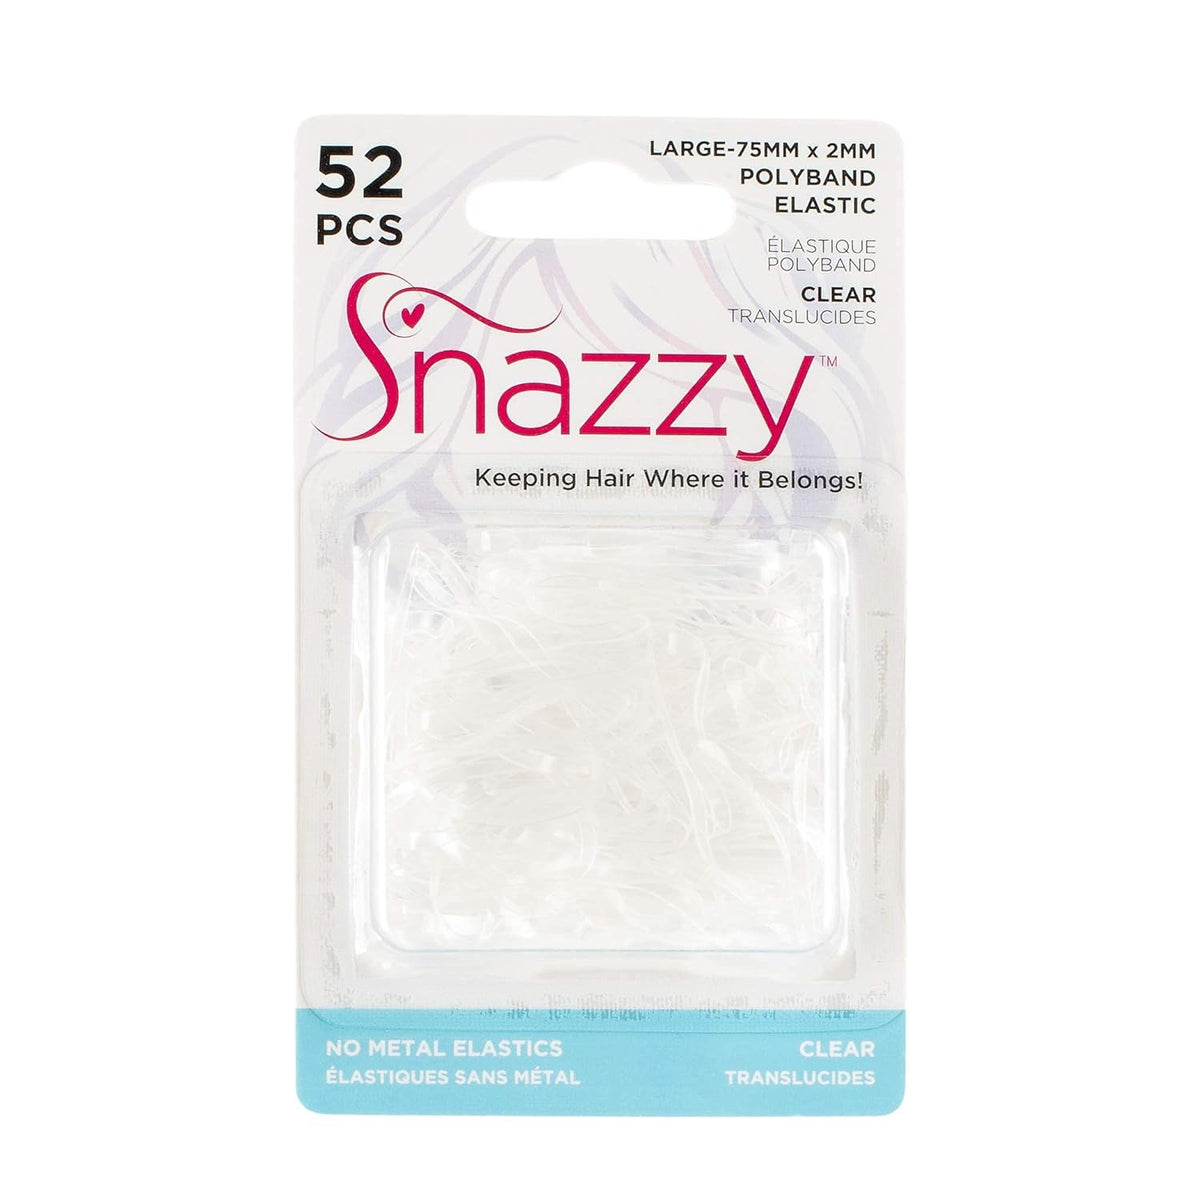 Snazzy Ouchless Mini Crystal Clear Polyband Rubber No Metal Elastics Band, 52 Count